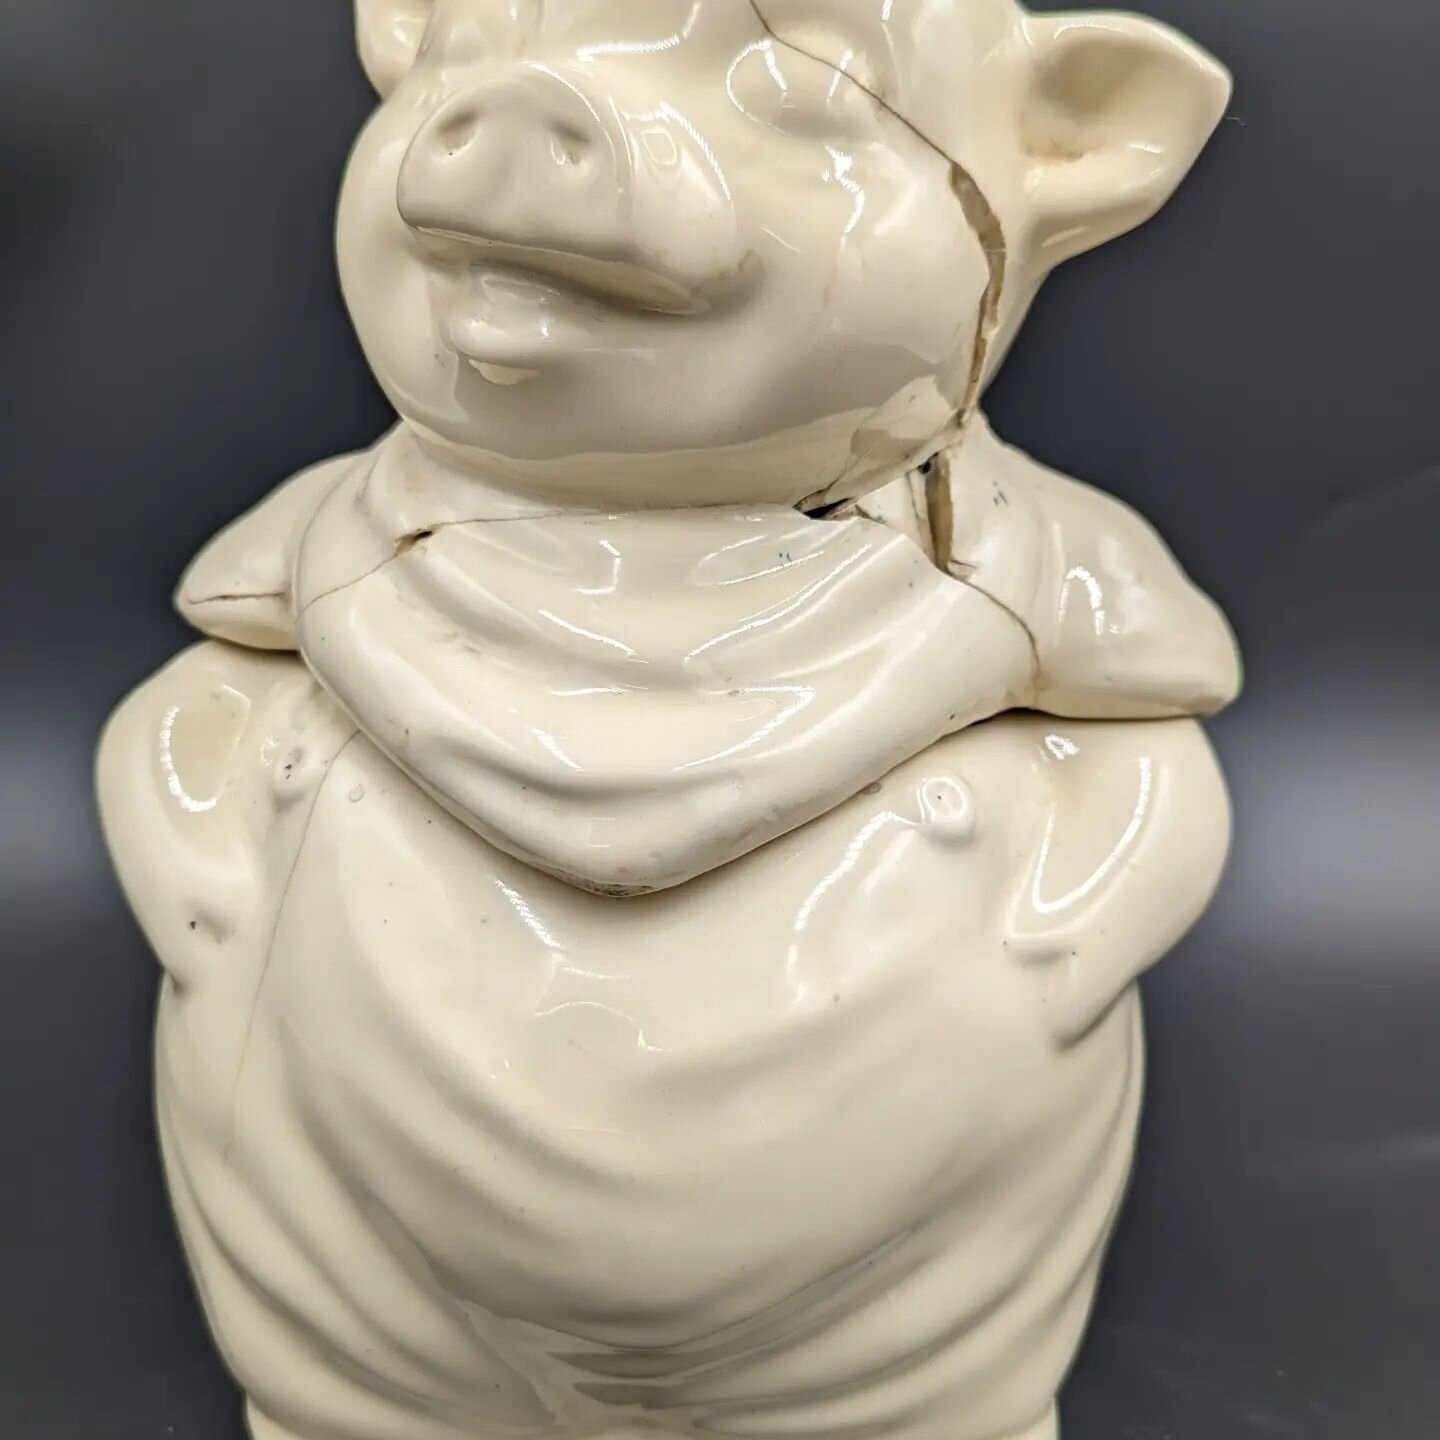 Today we attack the Frankenstein pig that someone bonded with four different adhesives!  This is one tough pig.

#jeffjohnsonrestorations #jjrestorations #ceramics #ceramicconservation #pig #cookiejar #shoplocalraleigh #instagram #instaphoto